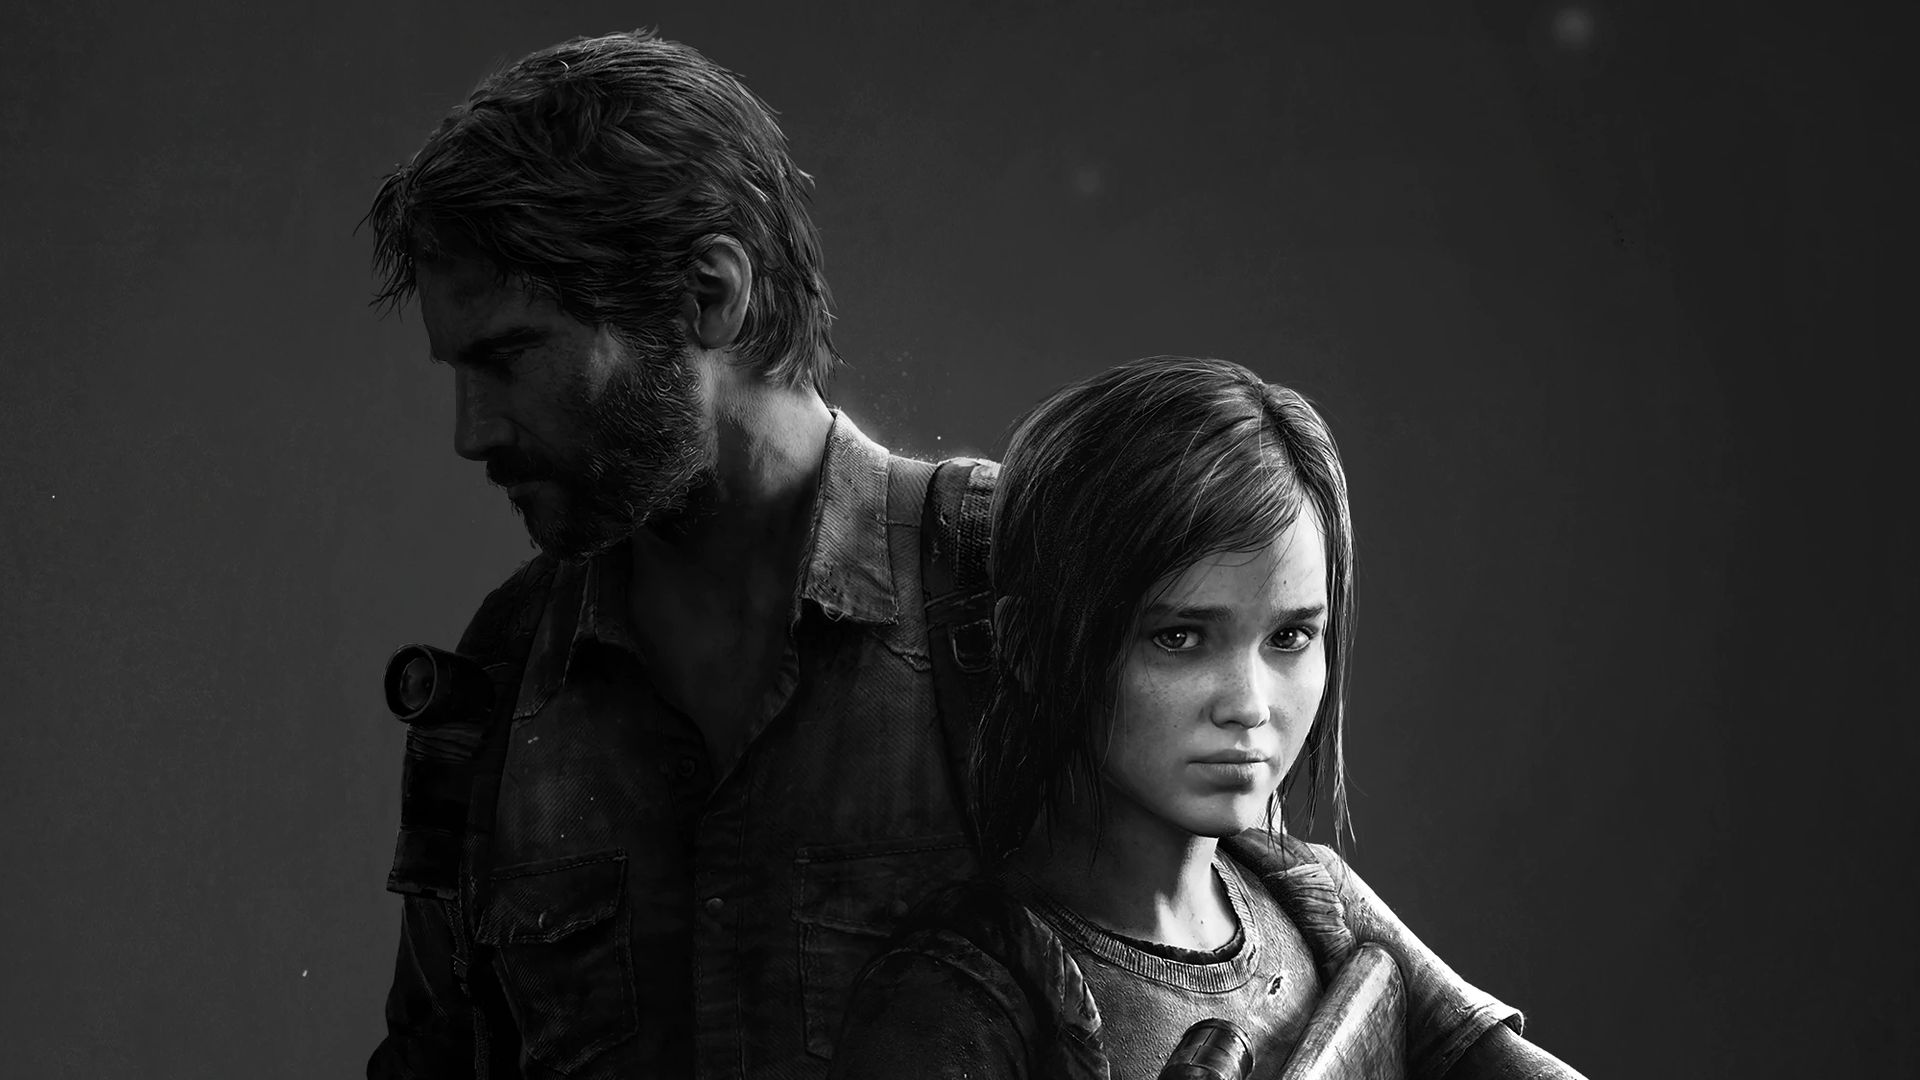 Дата выхода зе ласт. The last of us. Джоэл the last of us.